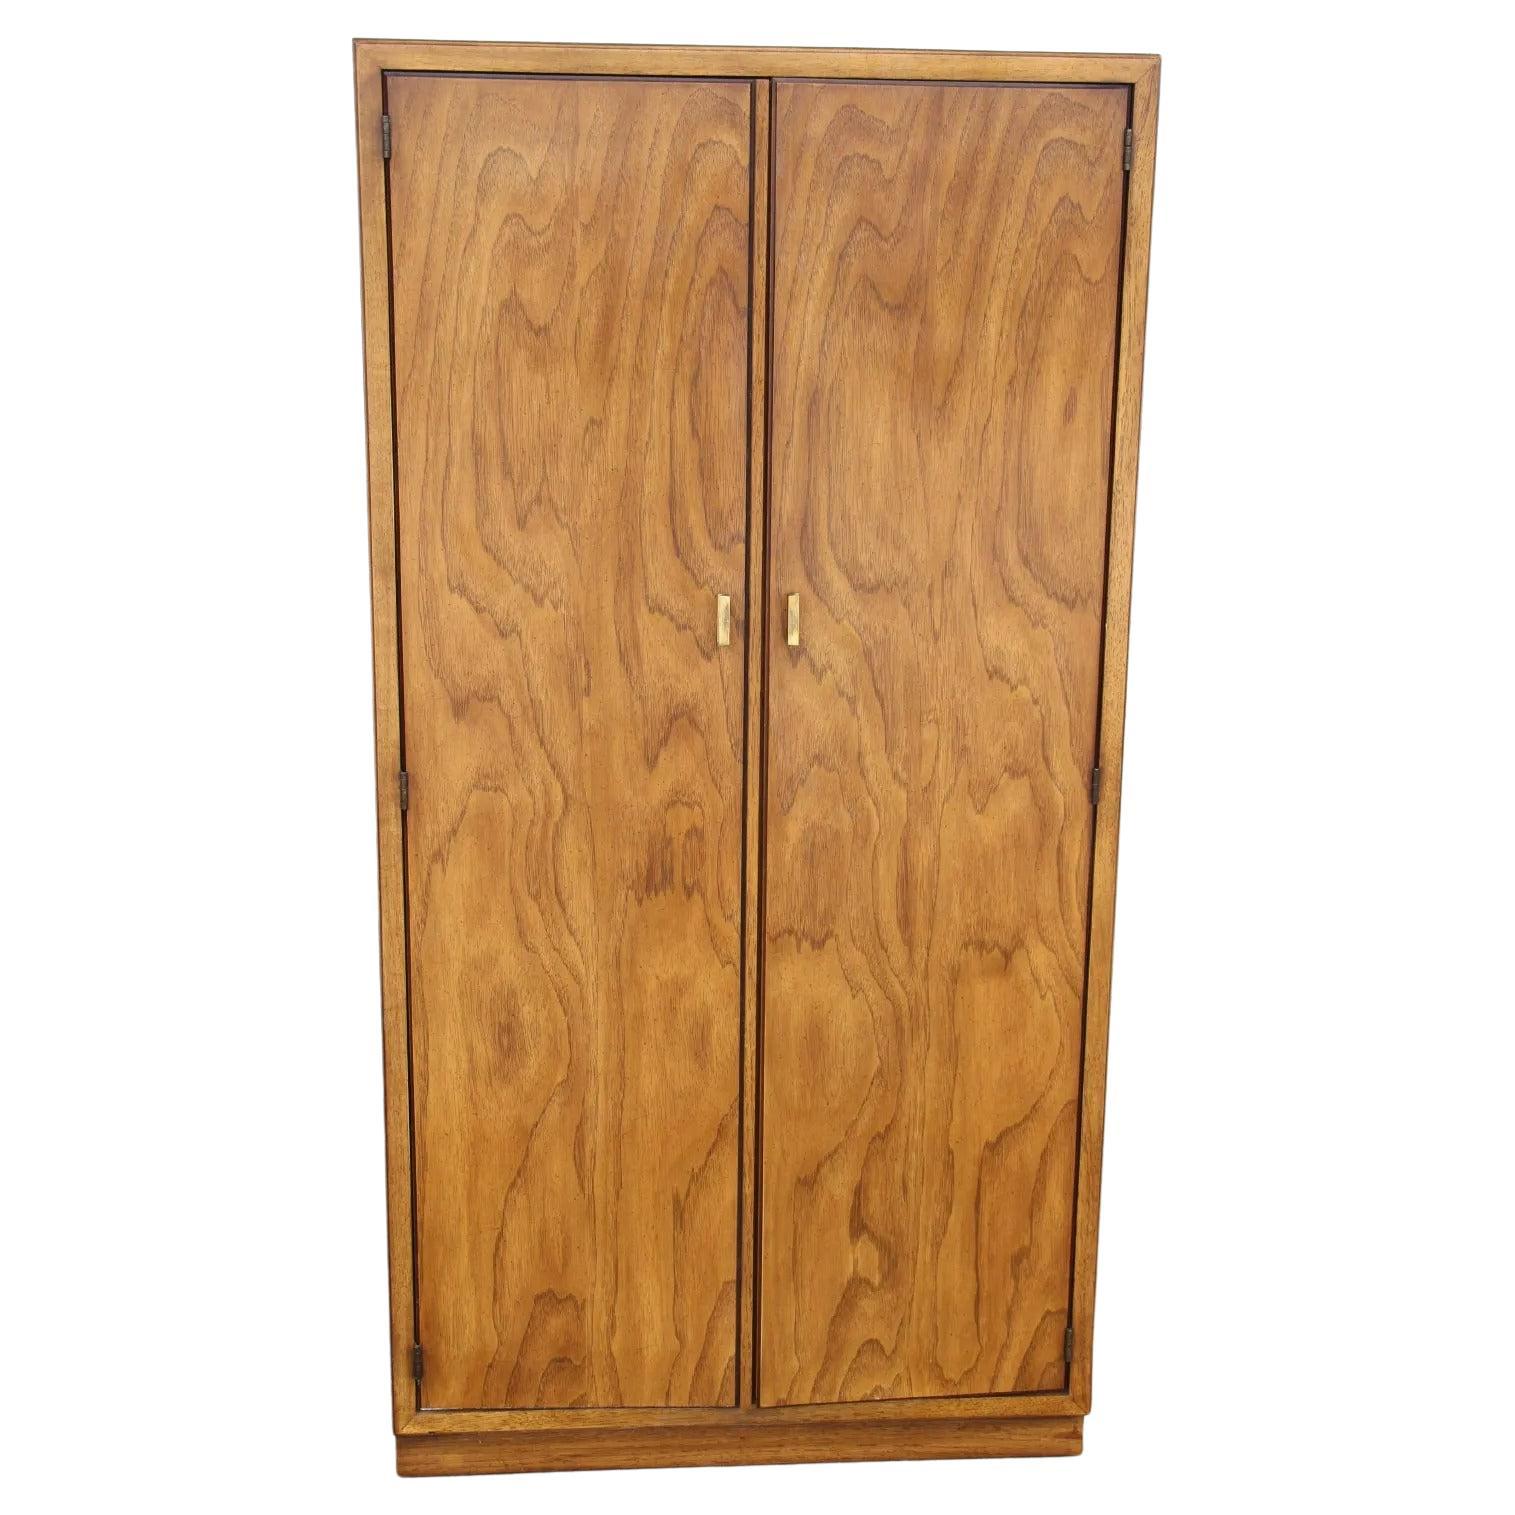 Dry bar cabinet by Drexel Heritage Consensus 

Flaxen pecan with a mirror back. Pull-out hidden laminated shelf sits concealed on top of the pull-out drawer. Adjustable glass shelves on top and bottom compartments. Lighted overhead interior.
  